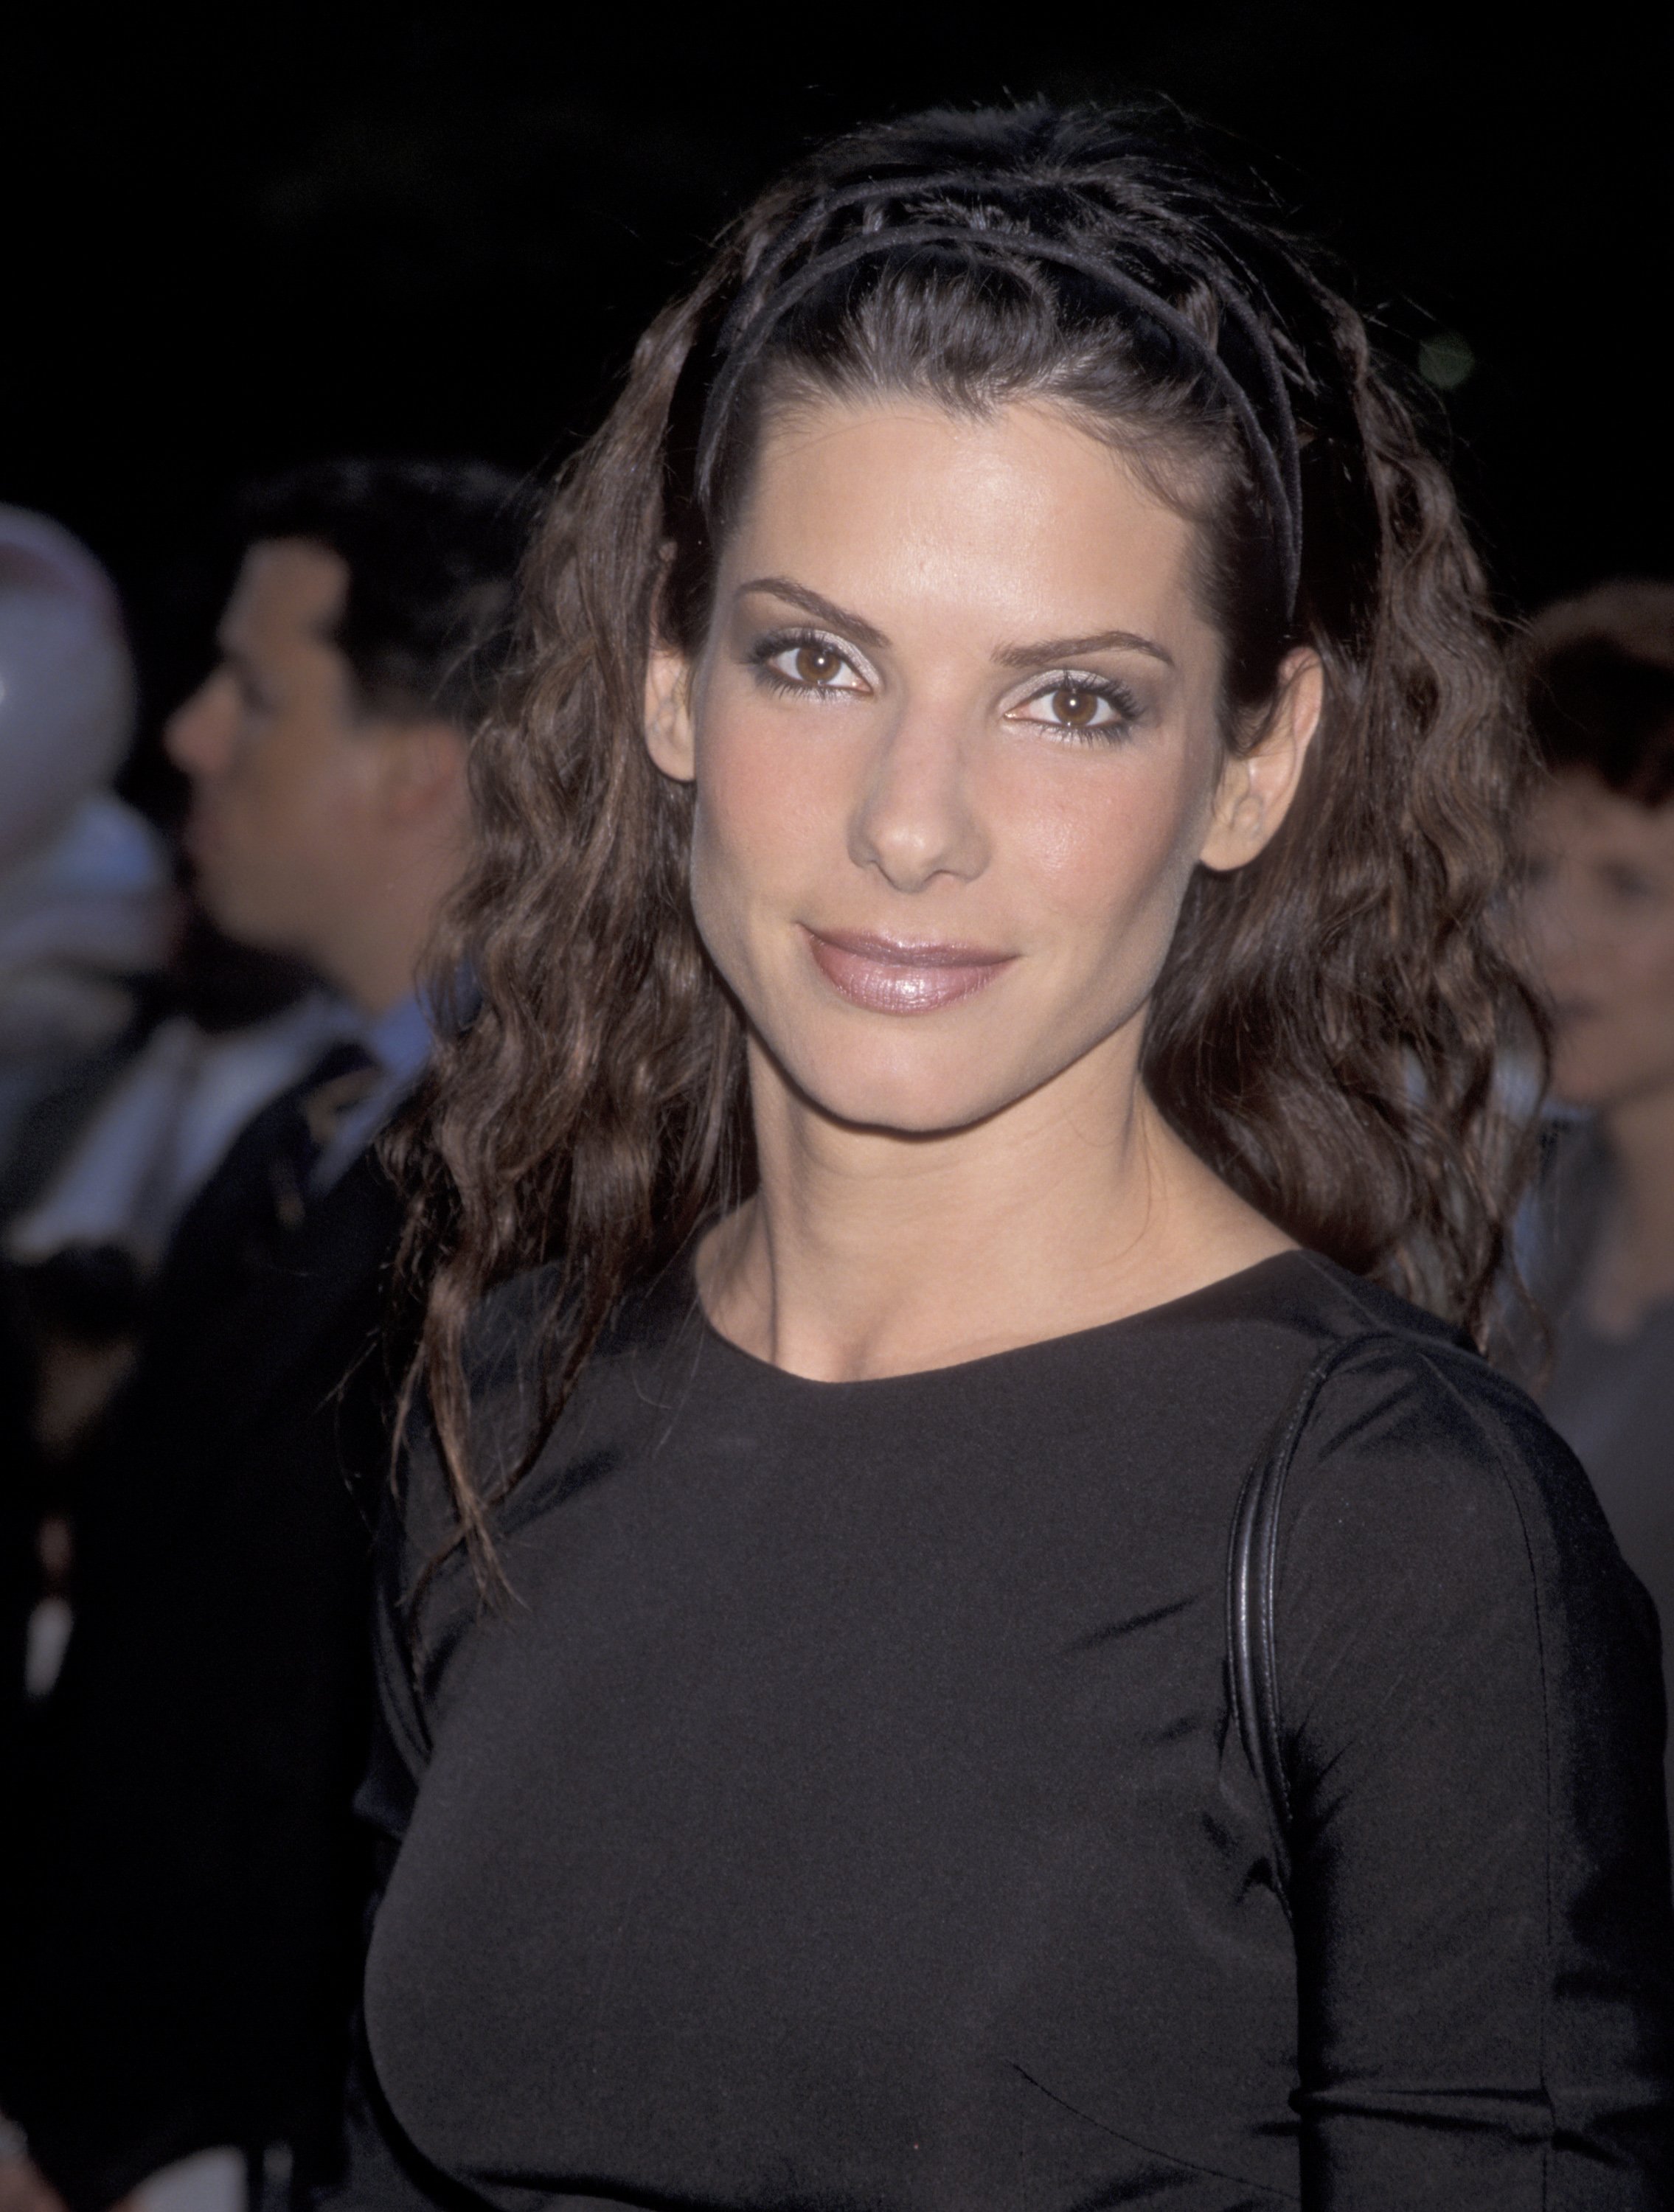 Sandra Bullock on June 4, 1998, at Tavern on the Green in New York City. | Source: Getty Images